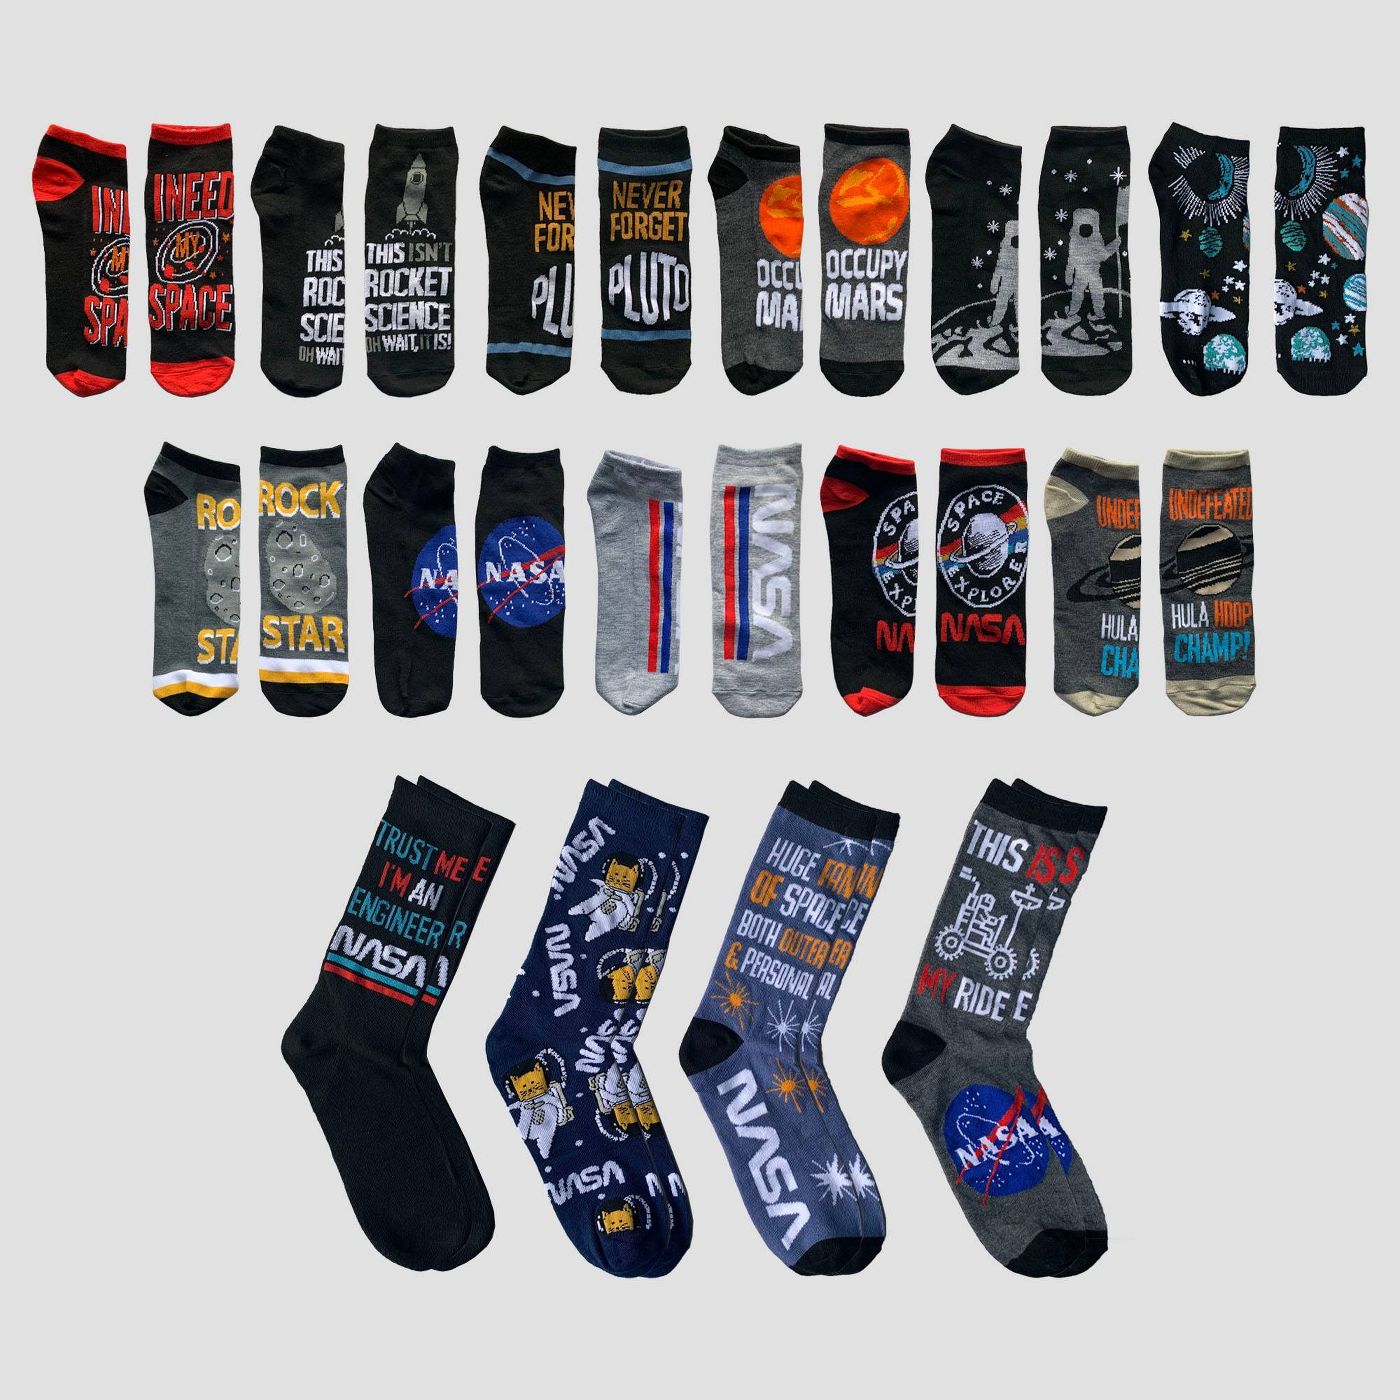 Men's NASA 15 Days of Socks Advent Calendar - Assorted Colors One Size - image 1 of 4